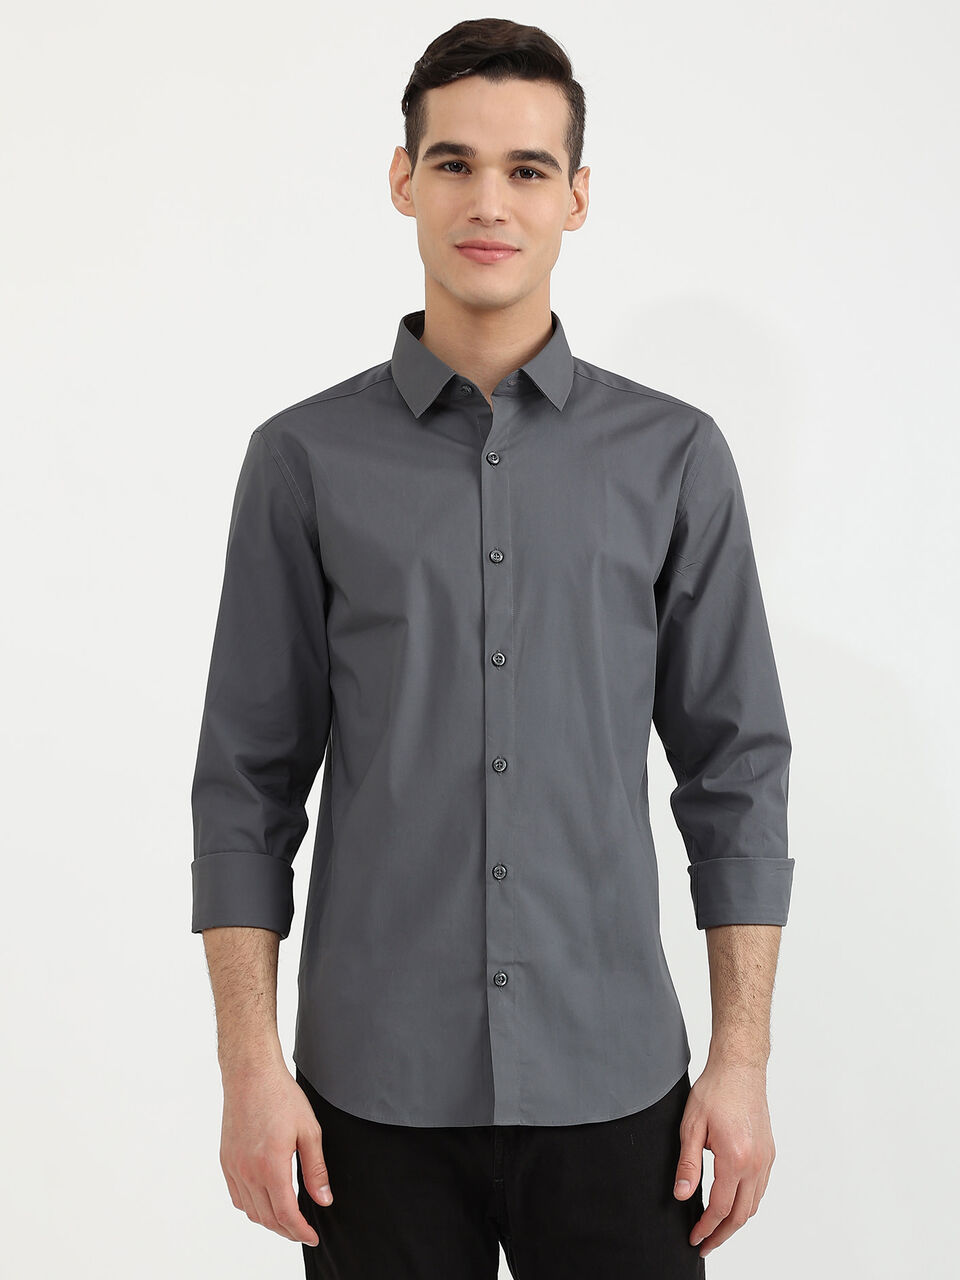 United Colors Of Benetton Mens Slim Fit Solid Shirt - Gray | Benetton